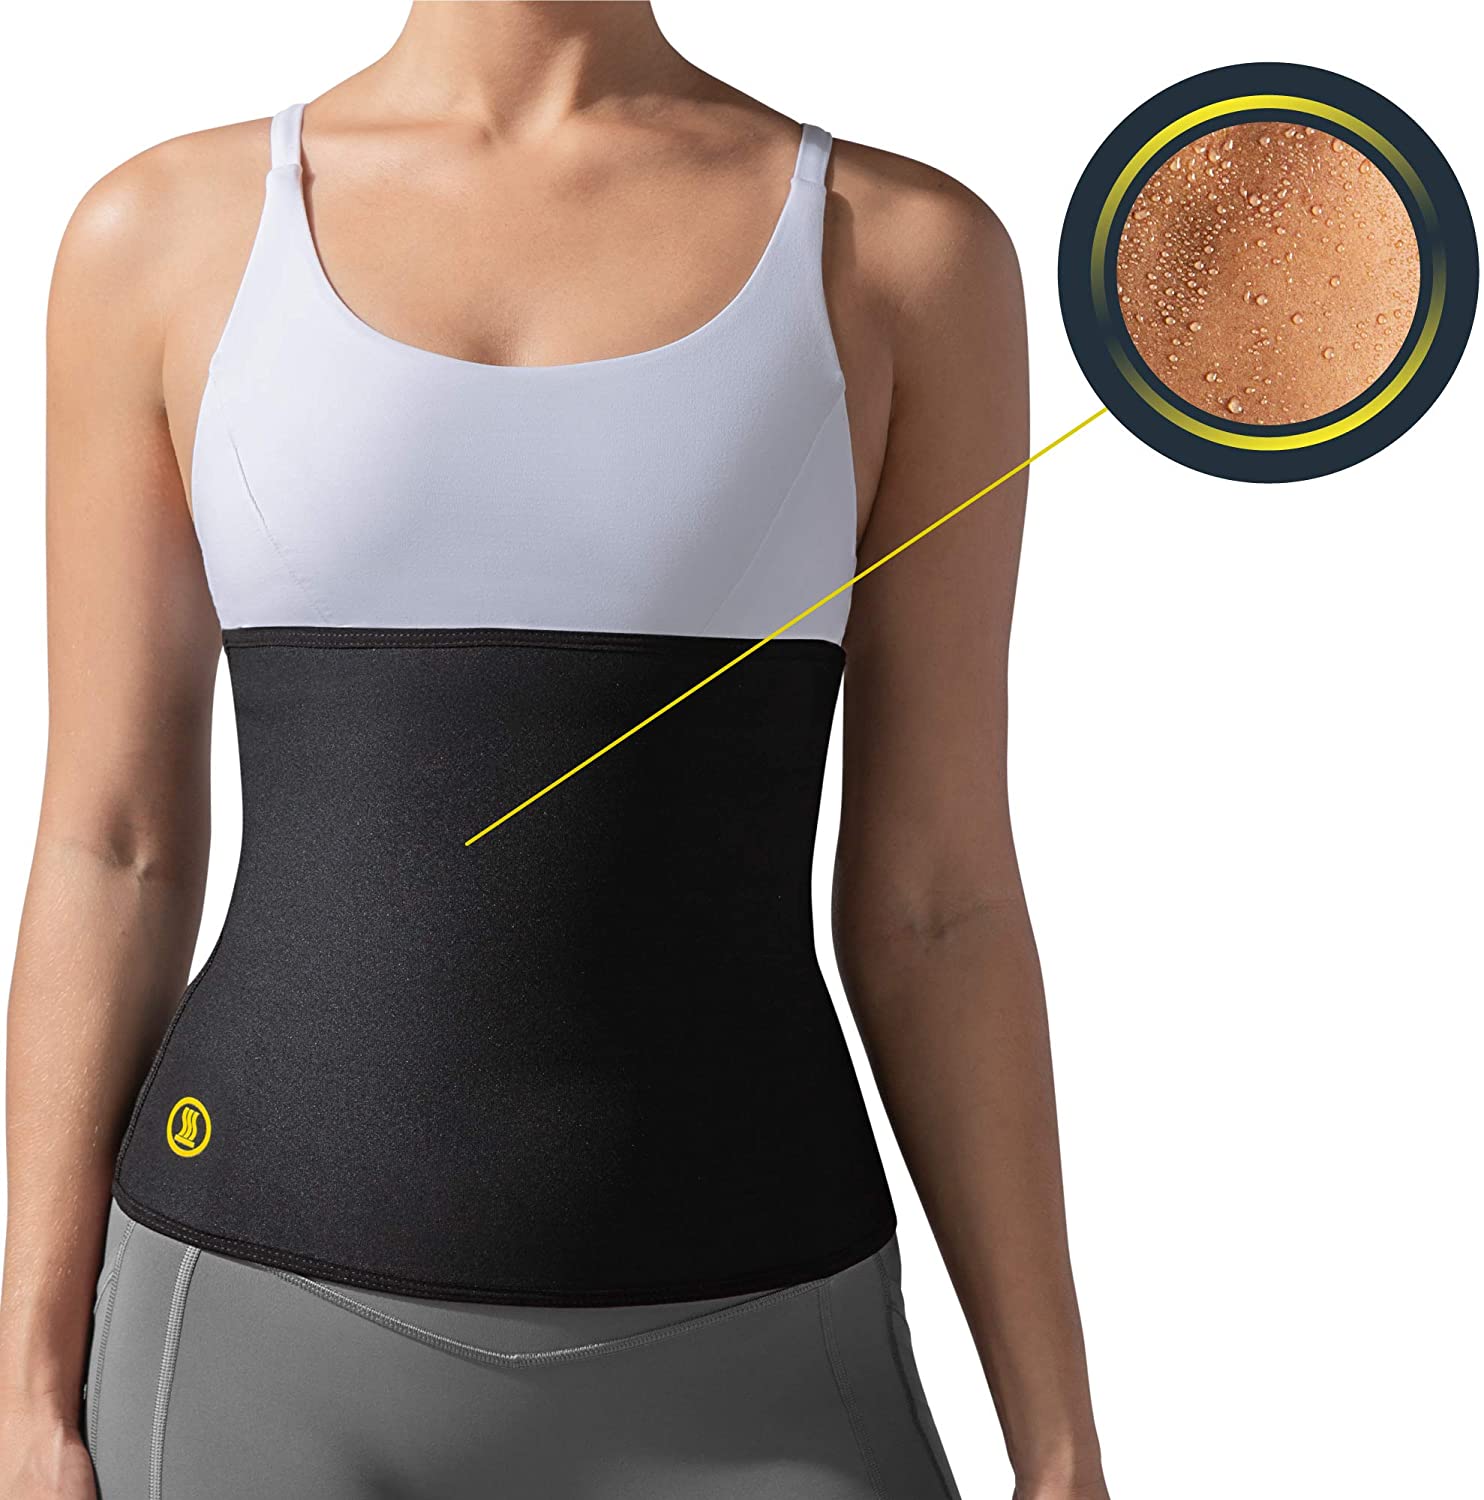 Nayanaulo.com - Hot Shaper Belt Rs 1000/- Neotex Black Hot Shapers Slimming  Belt Slim Belt that is specially designed with Prenotec technology that  increases core temperature helping your body sweat and helps